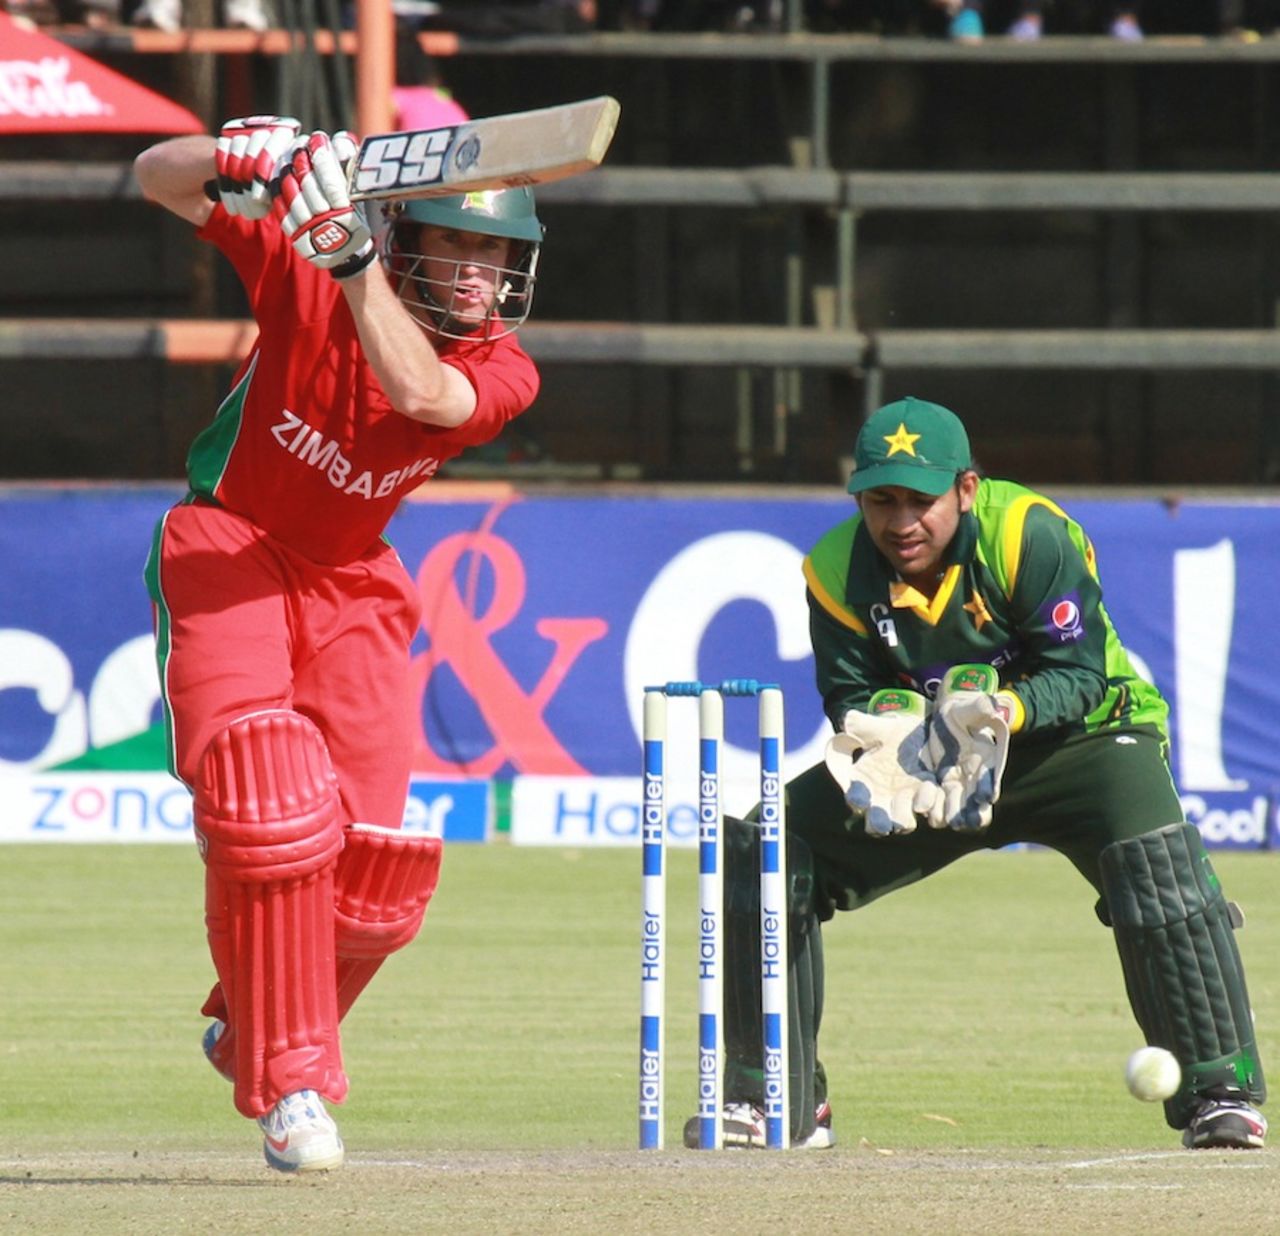 Sean Williams drives off the front foot, Zimbabwe v Pakistan, 2nd ODI, Harare, August 29, 2013